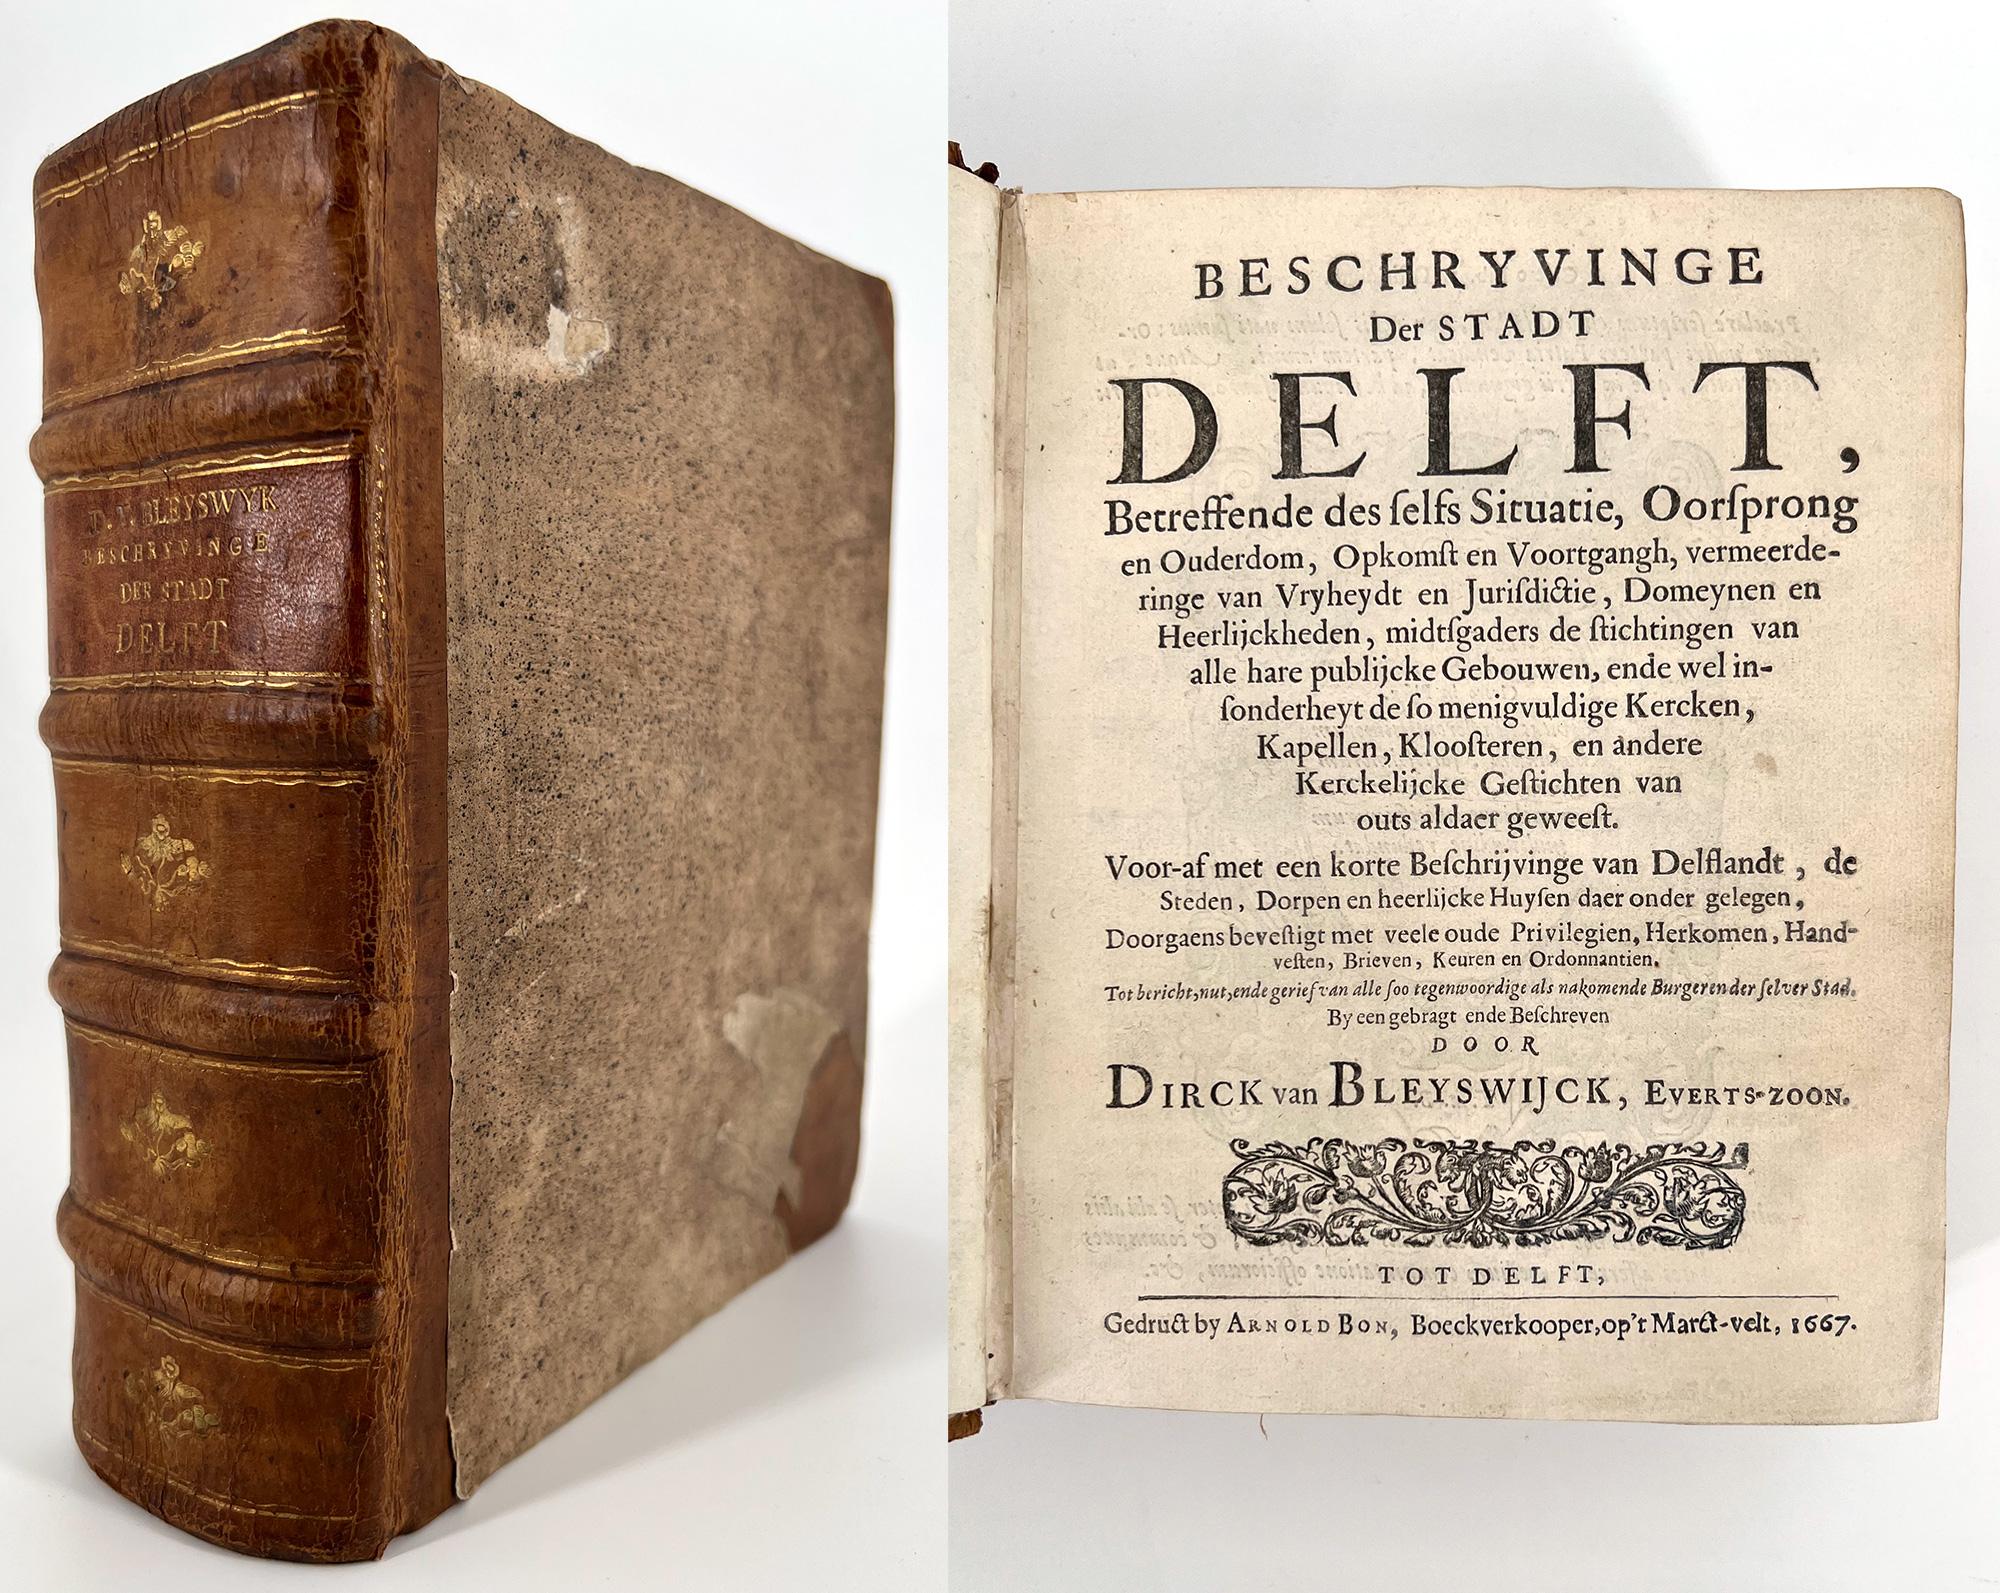 A very good copy of Bleyswijck famous description of the history, topography, institutions, and commercial life of Delft in the 17th Century. The plates are exquisite depiction's of Delft and its environs, with very close attention given to